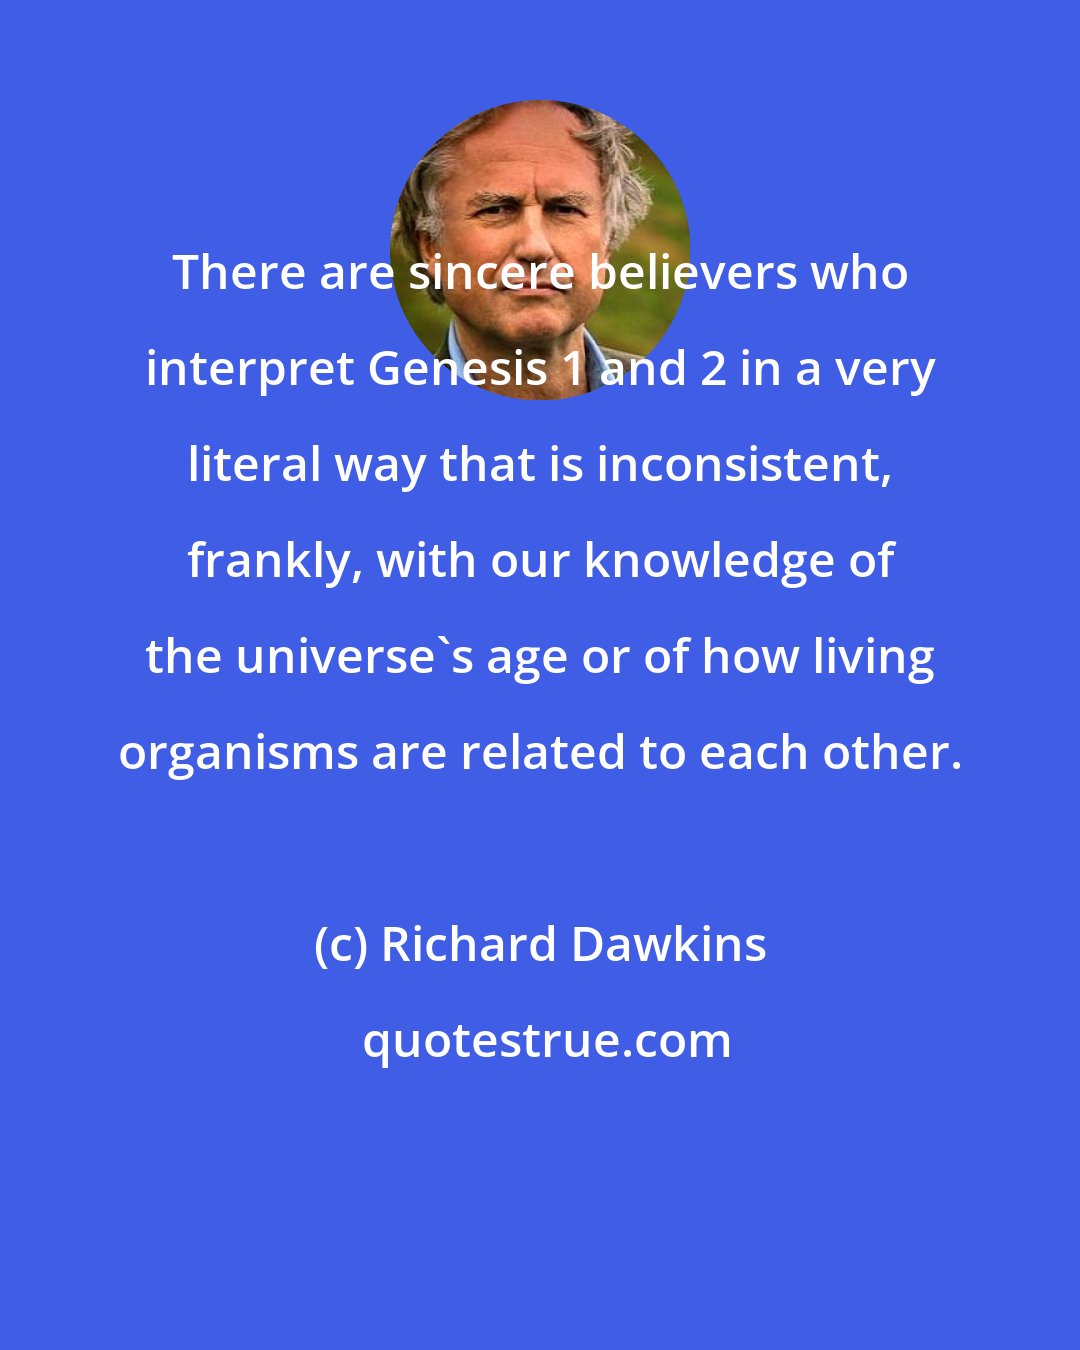 Richard Dawkins: There are sincere believers who interpret Genesis 1 and 2 in a very literal way that is inconsistent, frankly, with our knowledge of the universe's age or of how living organisms are related to each other.